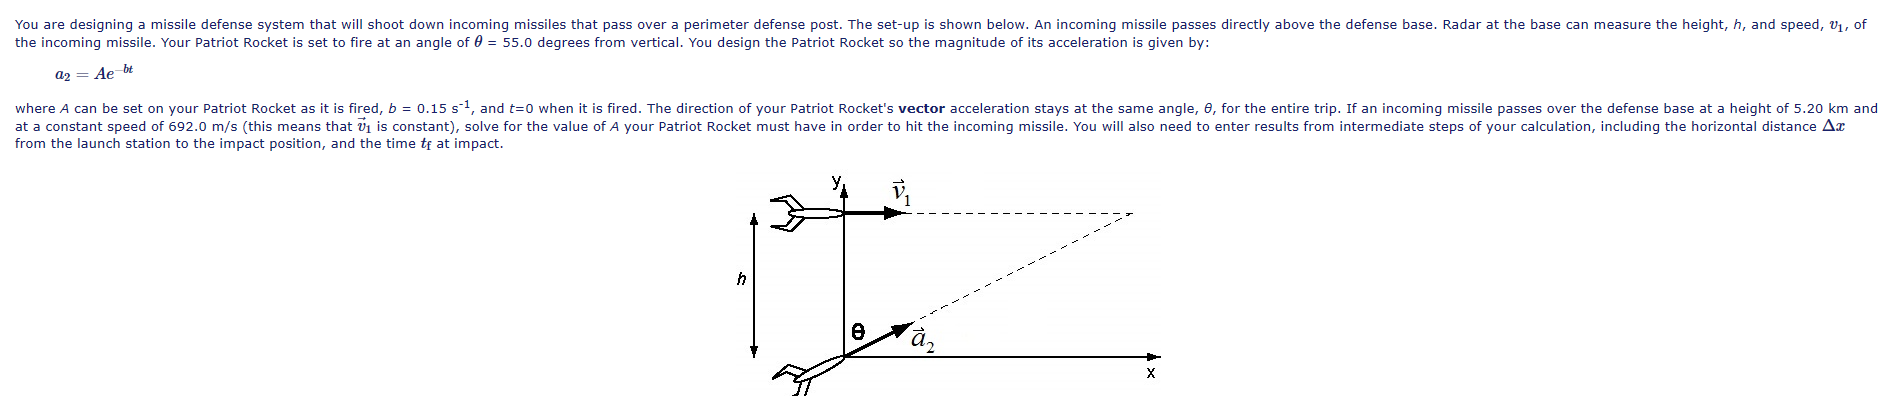 You are designing a missile defense system that will shoot down incoming missiles that pass over a perimeter defense post. The set-up is shown below. An incoming missile passes directly above the defense base. Radar at the base can measure the height, h, and speed, v1, of
the incoming missile. Your Patriot Rocket is set to fire at an angle of 0 = 55.0 degrees from vertical. You design the Patriot Rocket so the magnitude of its acceleration is given by:
a2 = Ae bt
where A can be set on your Patriot Rocket as it is fired, b = 0.15 s1, and t=0 when it is fired. The direction of your Patriot Rocket's vector acceleration stays at the same angle, e, for the entire trip. If an incoming missile passes over the defense base at a height of 5.20 km and
at a constant speed of 692.0 m/s (this means that vj is constant), solve for the value of A your Patriot Rocket must have in order to hit the incoming missile. You will also need to enter results from intermediate steps of your calculation, including the horizontal distance Ar
from the launch station to the impact position, and the time tf at impact.
